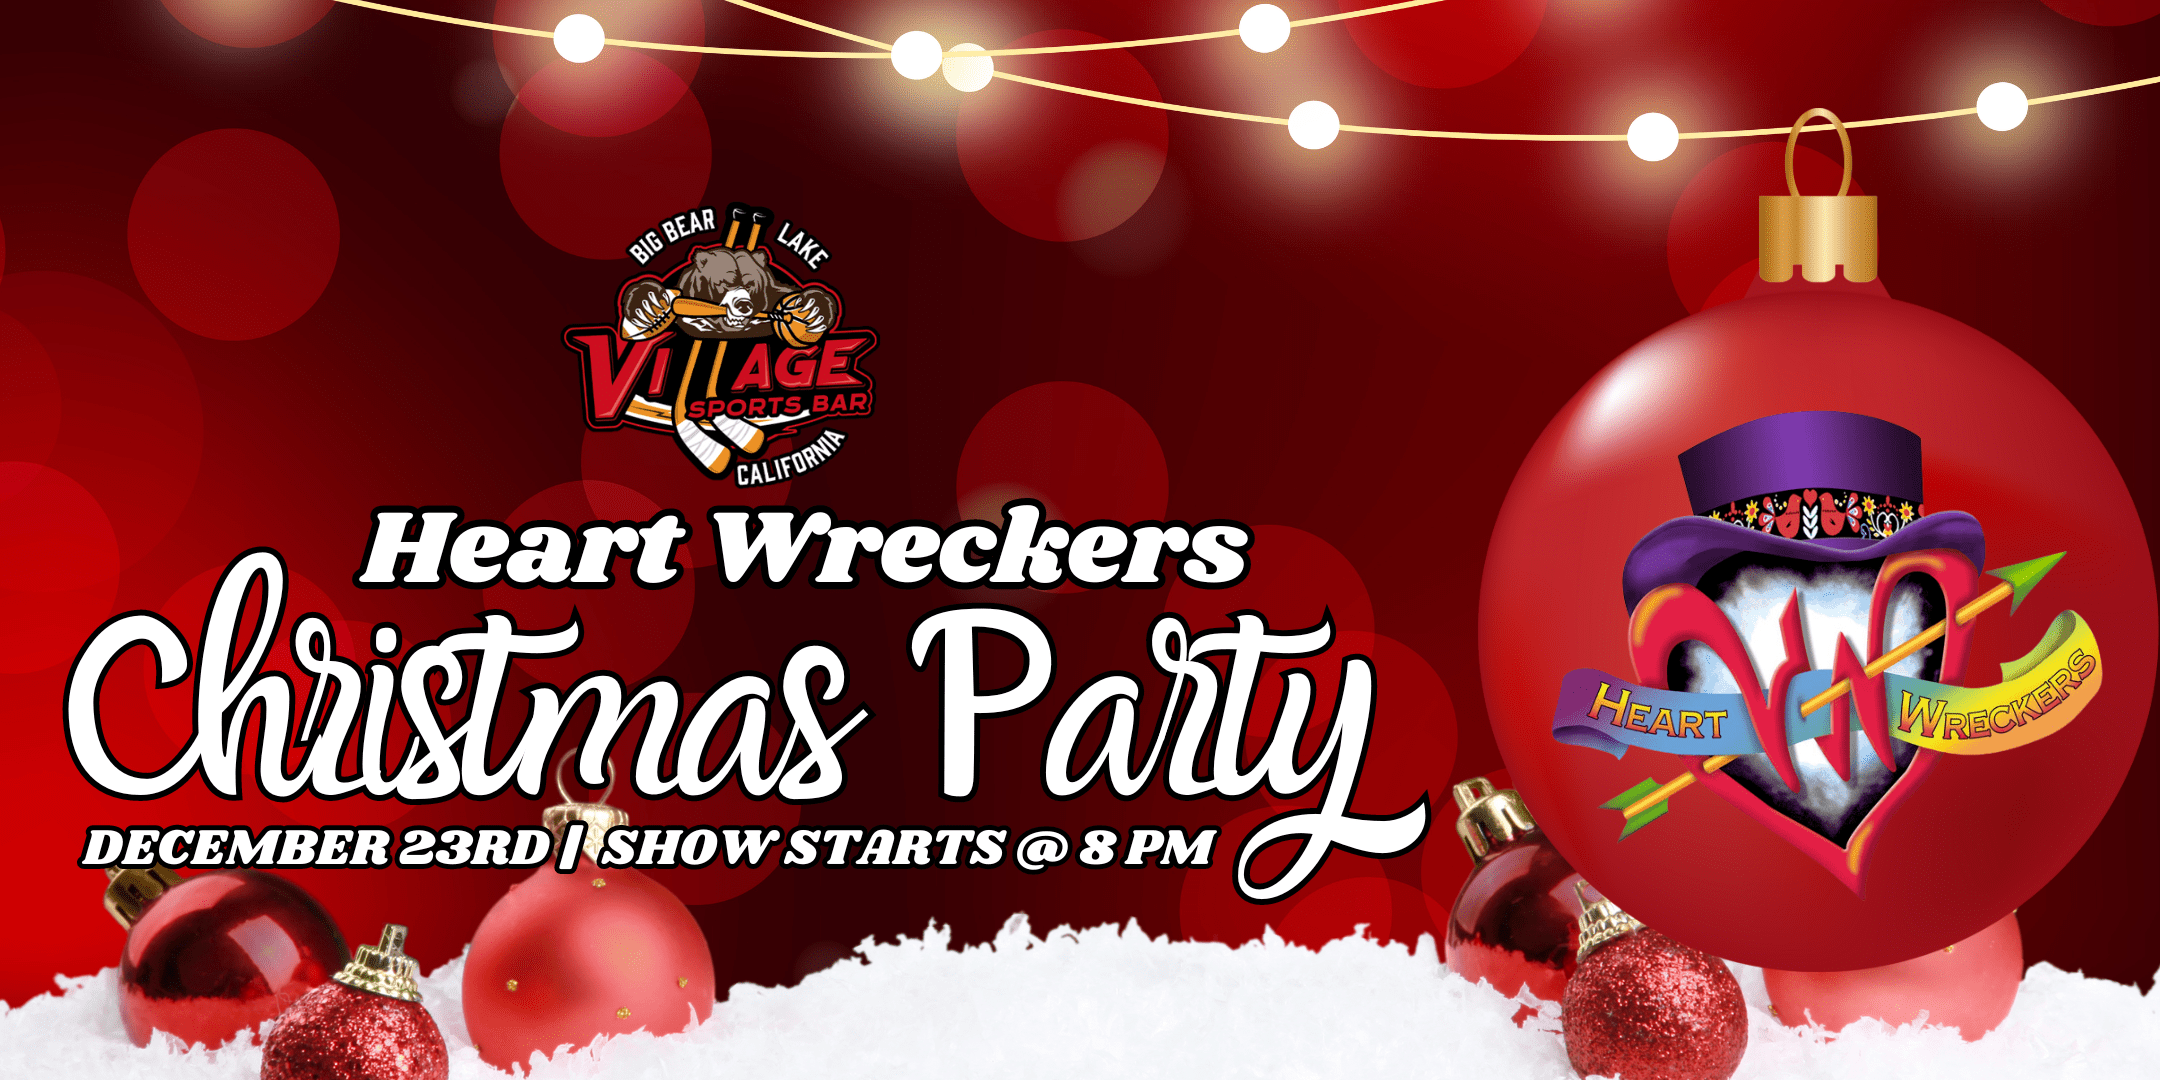 Village Sports Bar Presents: Heart Wreckers: Tribute to Tom Petty Christmas Party